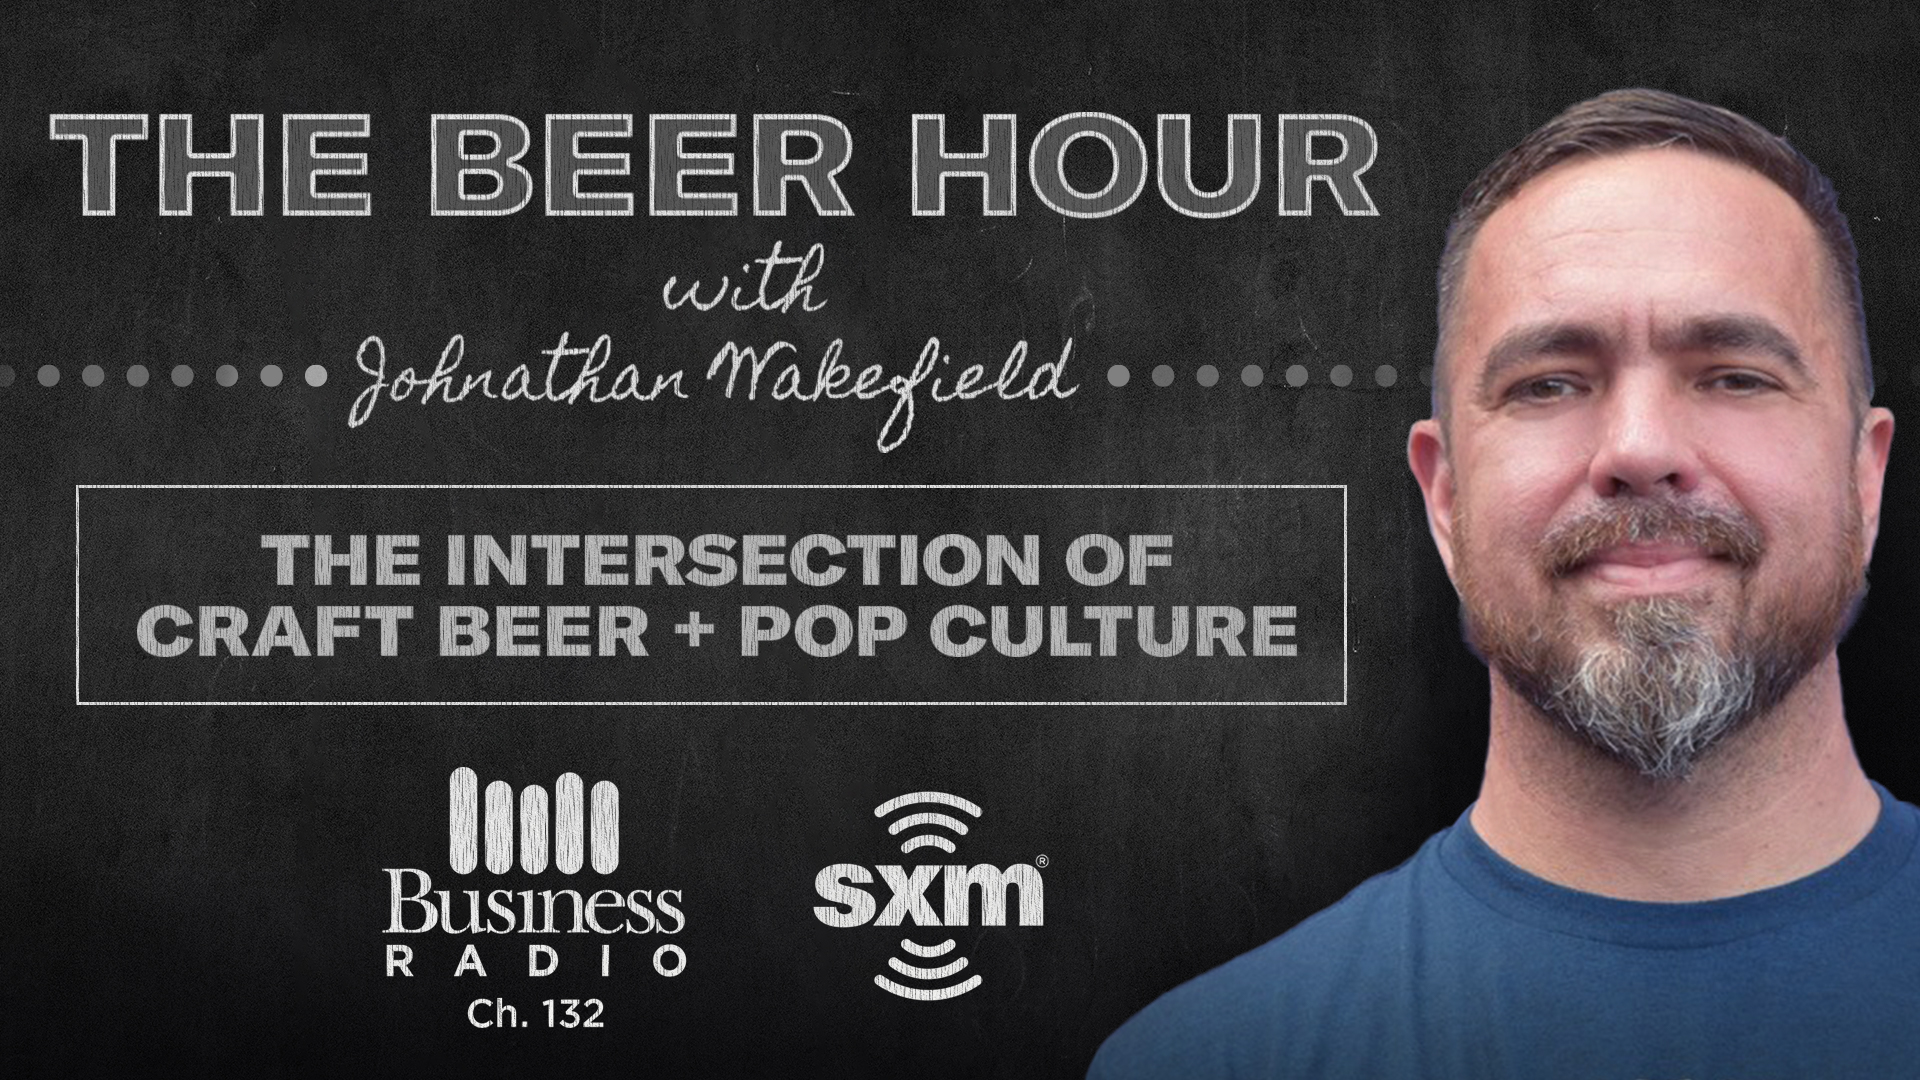 SiriusXM Business Radio The Beer Hour with Johnathan Wakefield